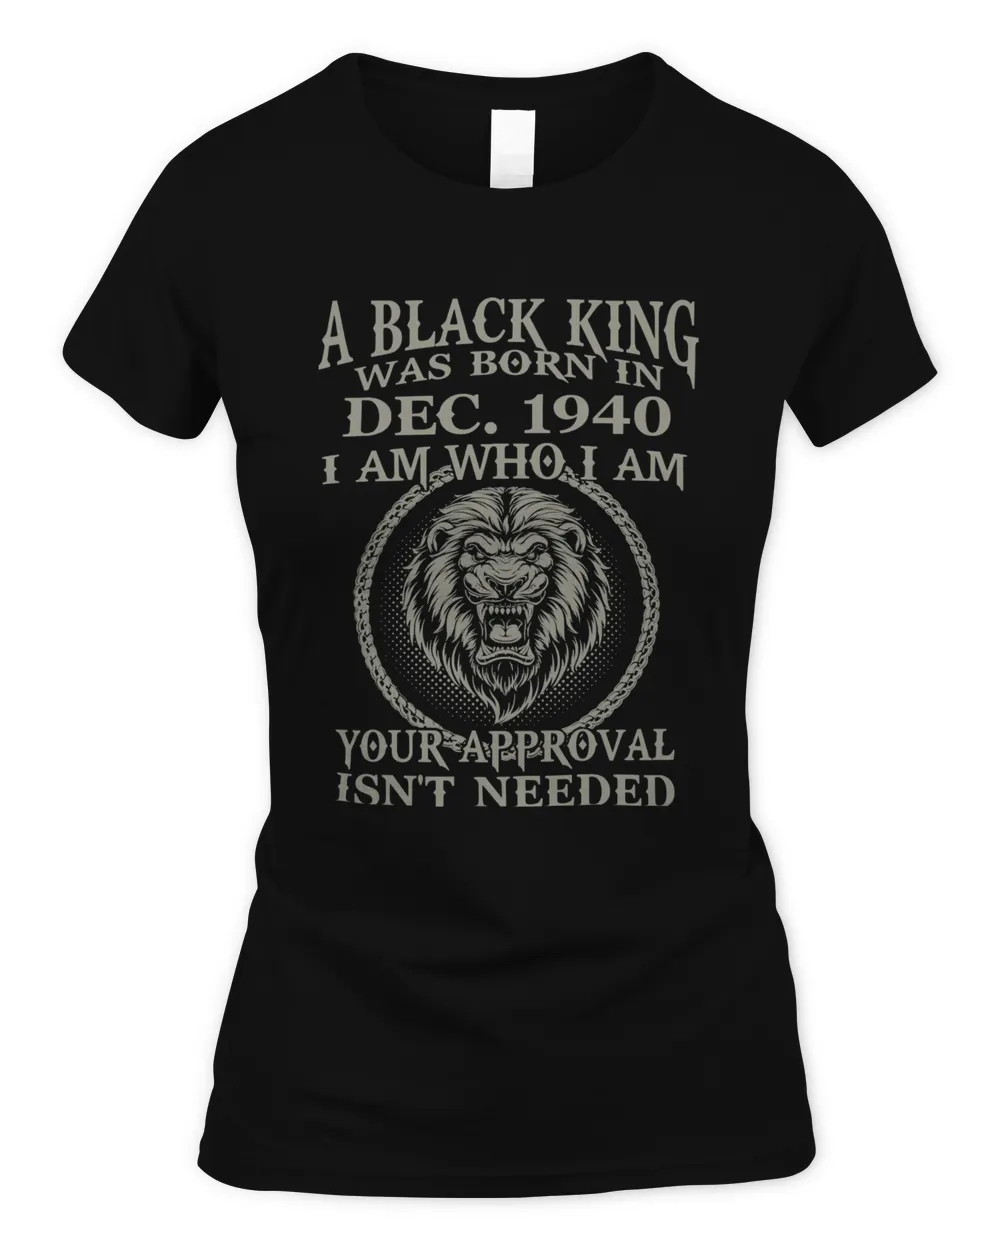 Black King Are Born In DECEMBER 1940. Black King Was Born In DECEMBER 1940 Classic T-Shirt